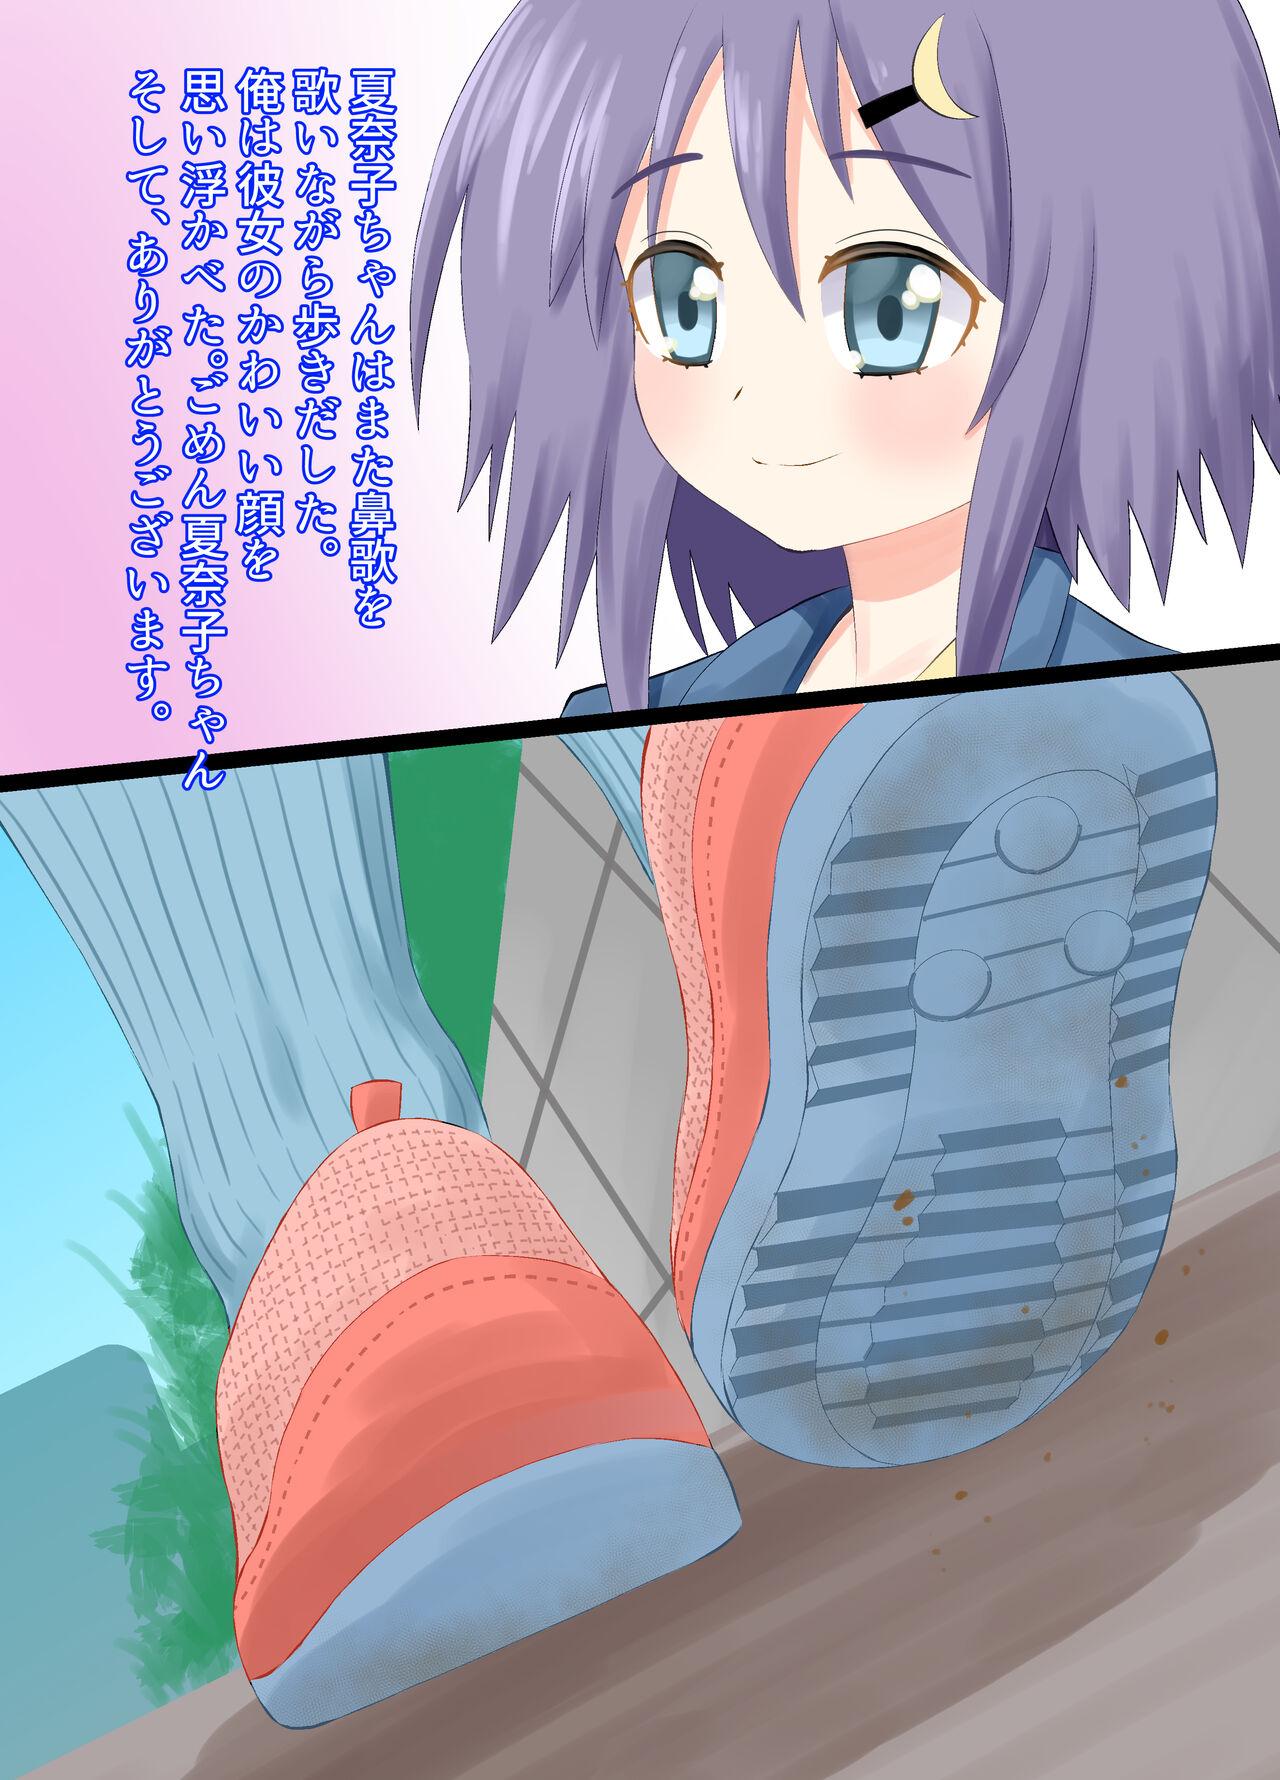 A CG collection of getting smaller and being stepped on by a girl 33